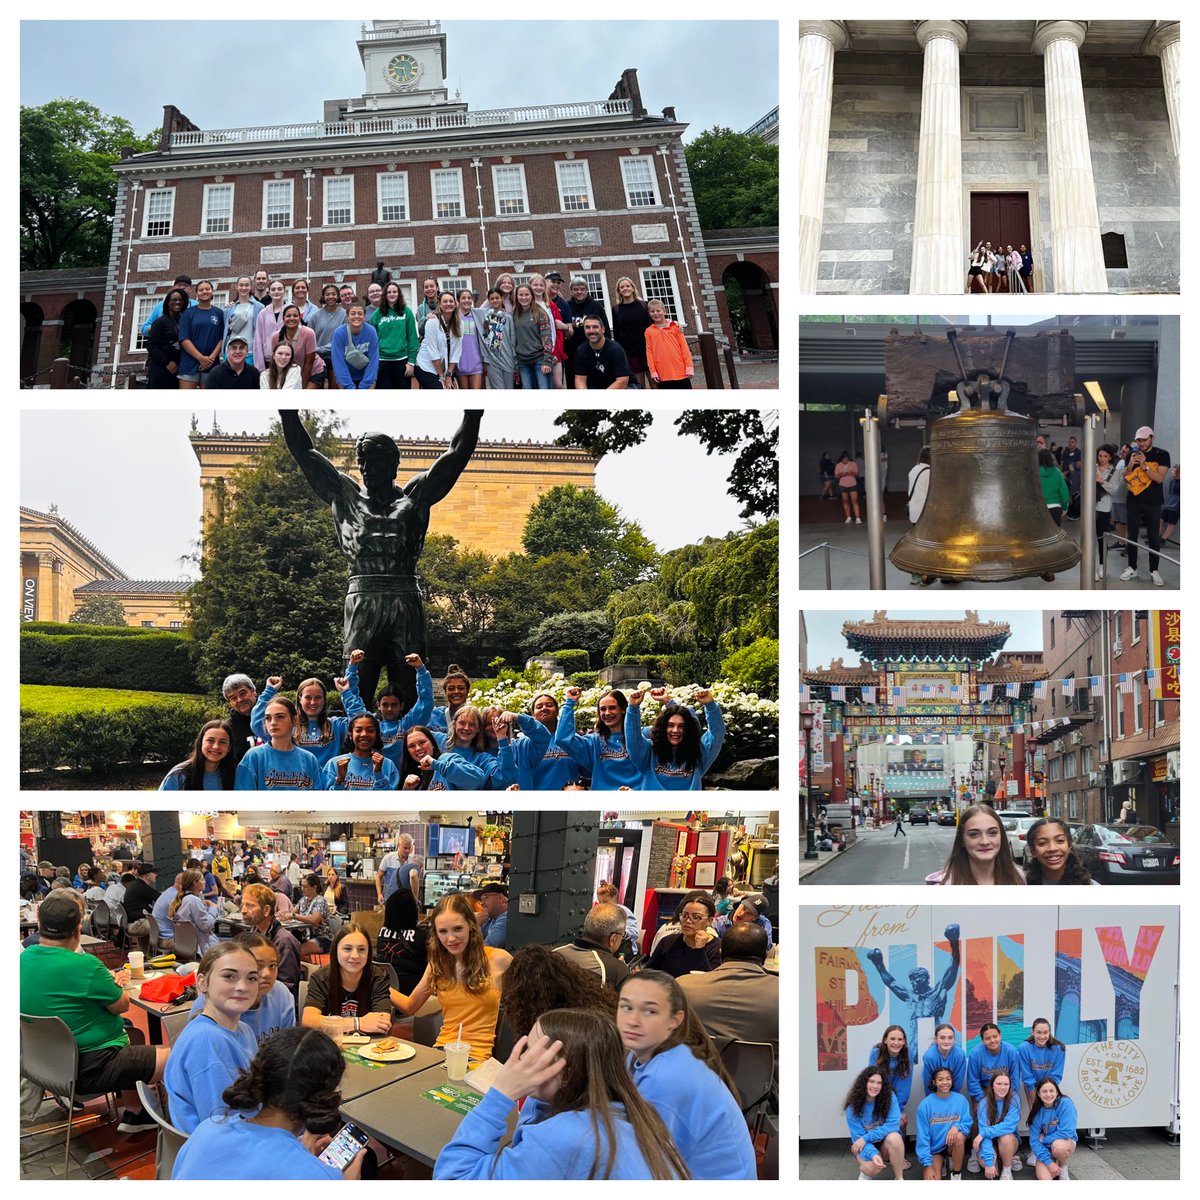 Phoenix in Philly!
Liberty Bell✅
Independence Hall✅
Reading Terminal Market✅
Rocky Steps✅
Chinatown✅
#makingMemories #moreThanBasketball 
#phoenixProud